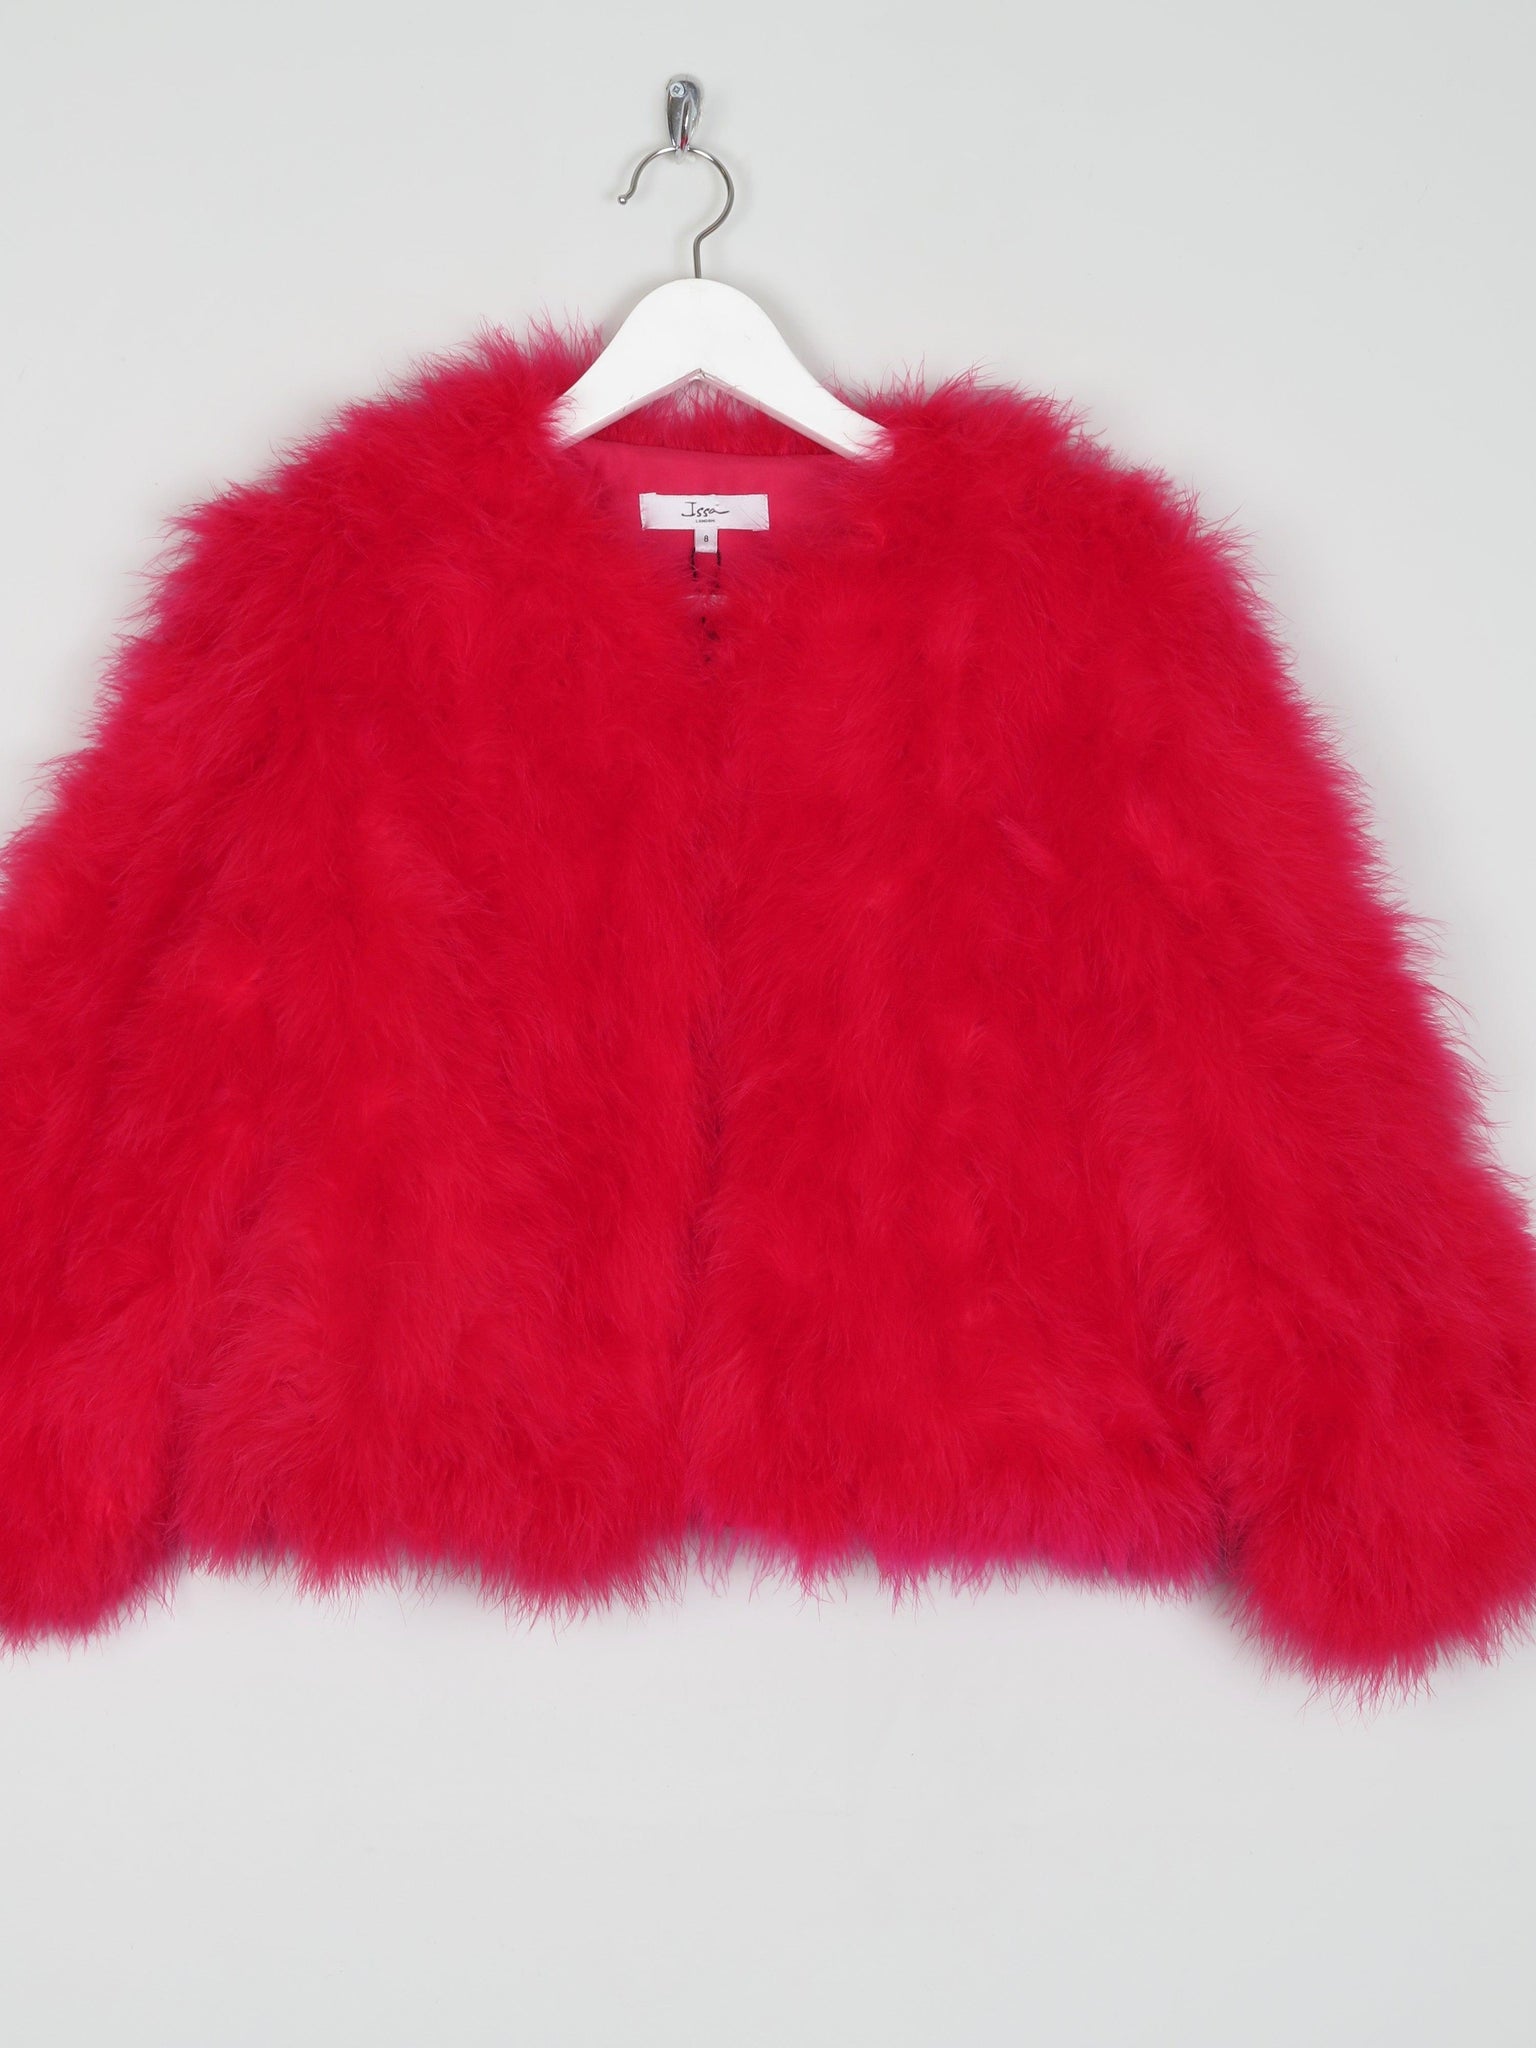 Women’s Red Marabou Feather Cropped Jacket Issa 8 - The Harlequin